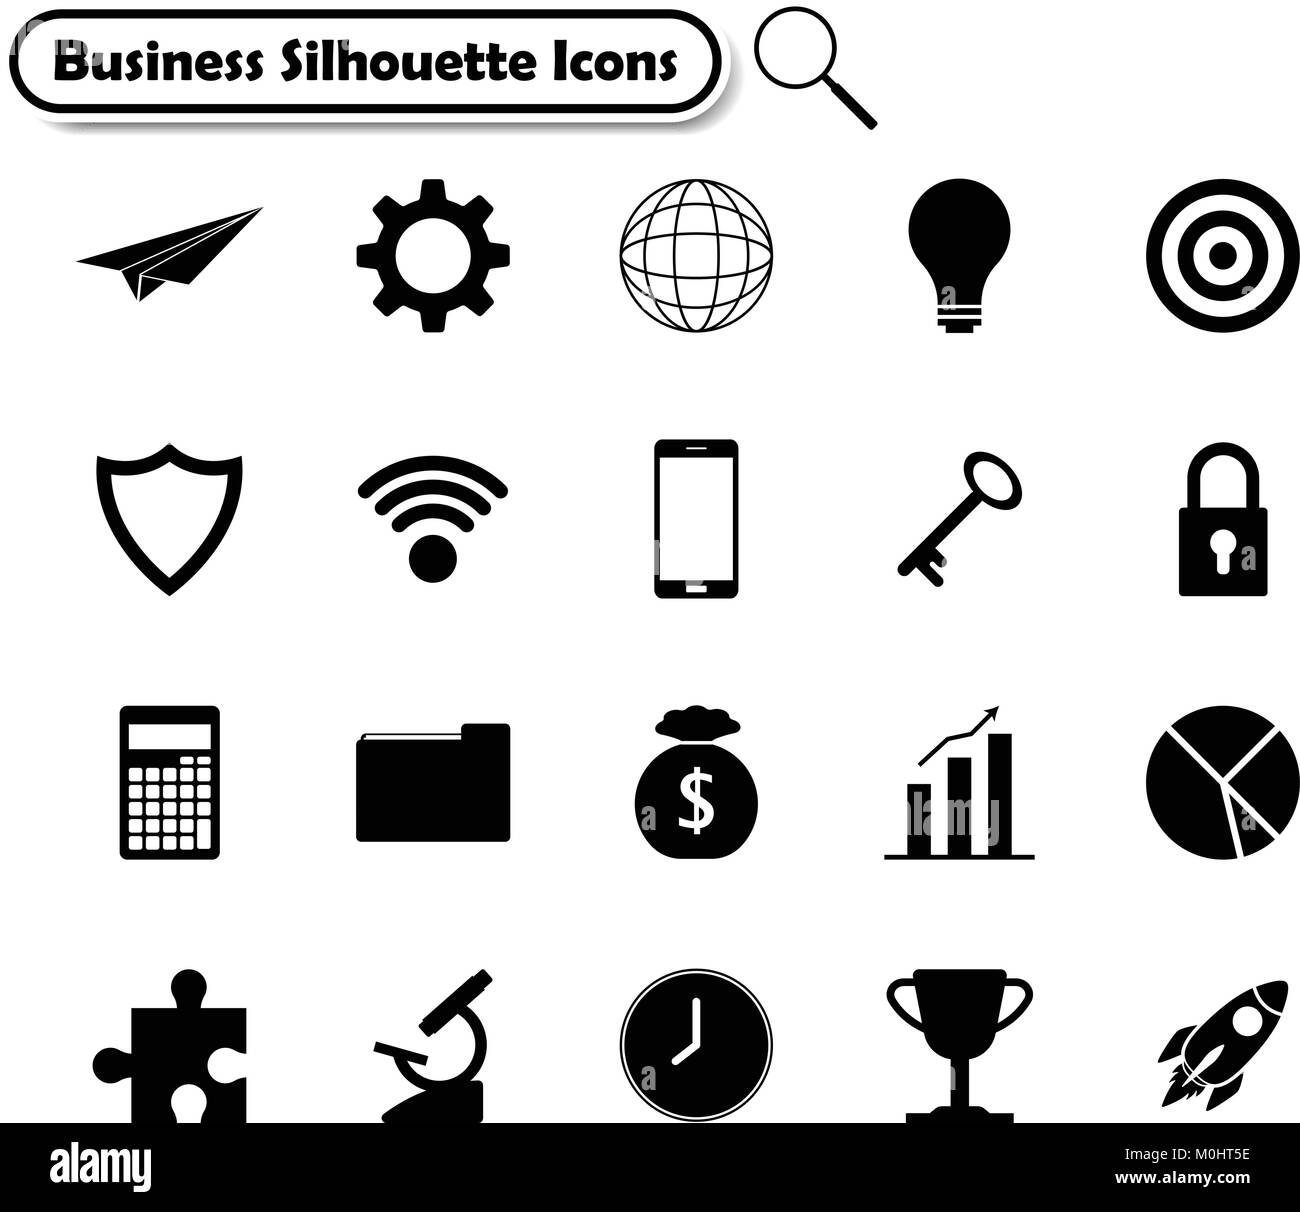 Vector Illustration Ready-To-Use 21 Silhouette Business Flat Icons Designed as Multiple Objects Involved In Work, Startup, Finance, Data Security. Stock Vector